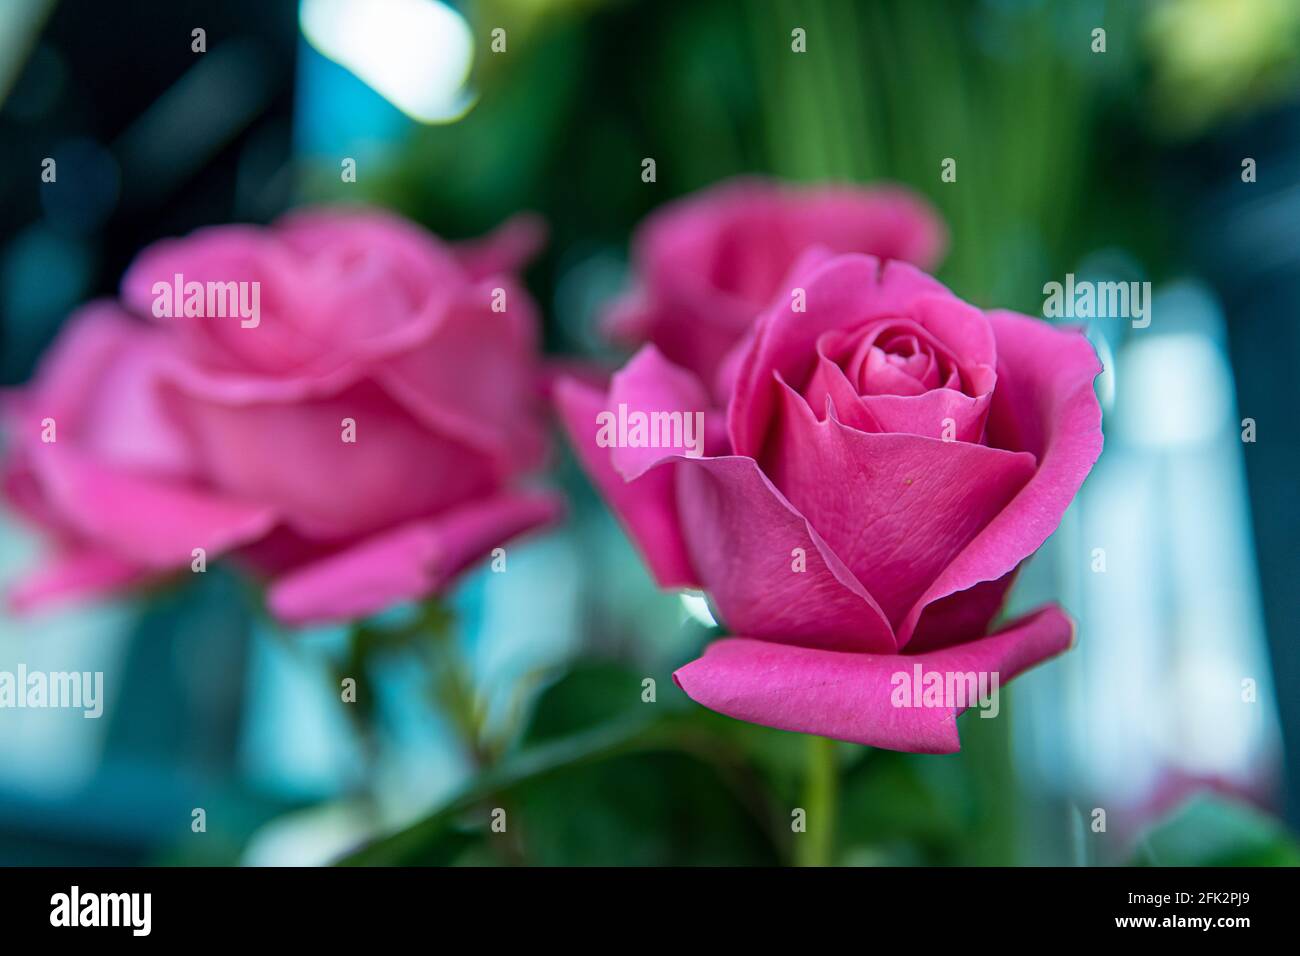 Two pink roses contrasting with the glossy, dark green leaves. Flamboyant, pink rose shrub in spring. Two bicolor, peach-fuchsia roses. selective focu Stock Photo